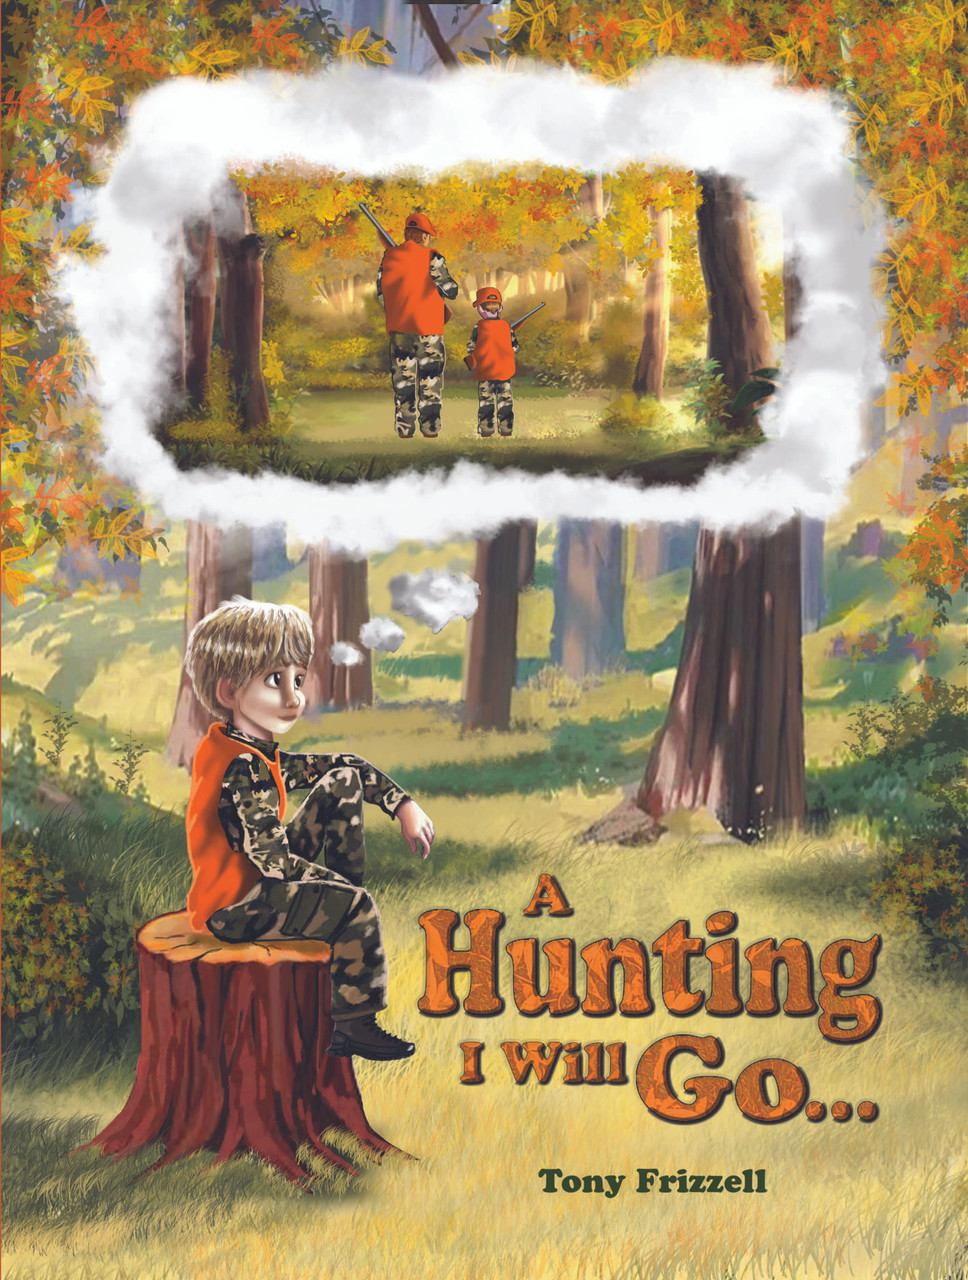 The Art of Hunting [Book]